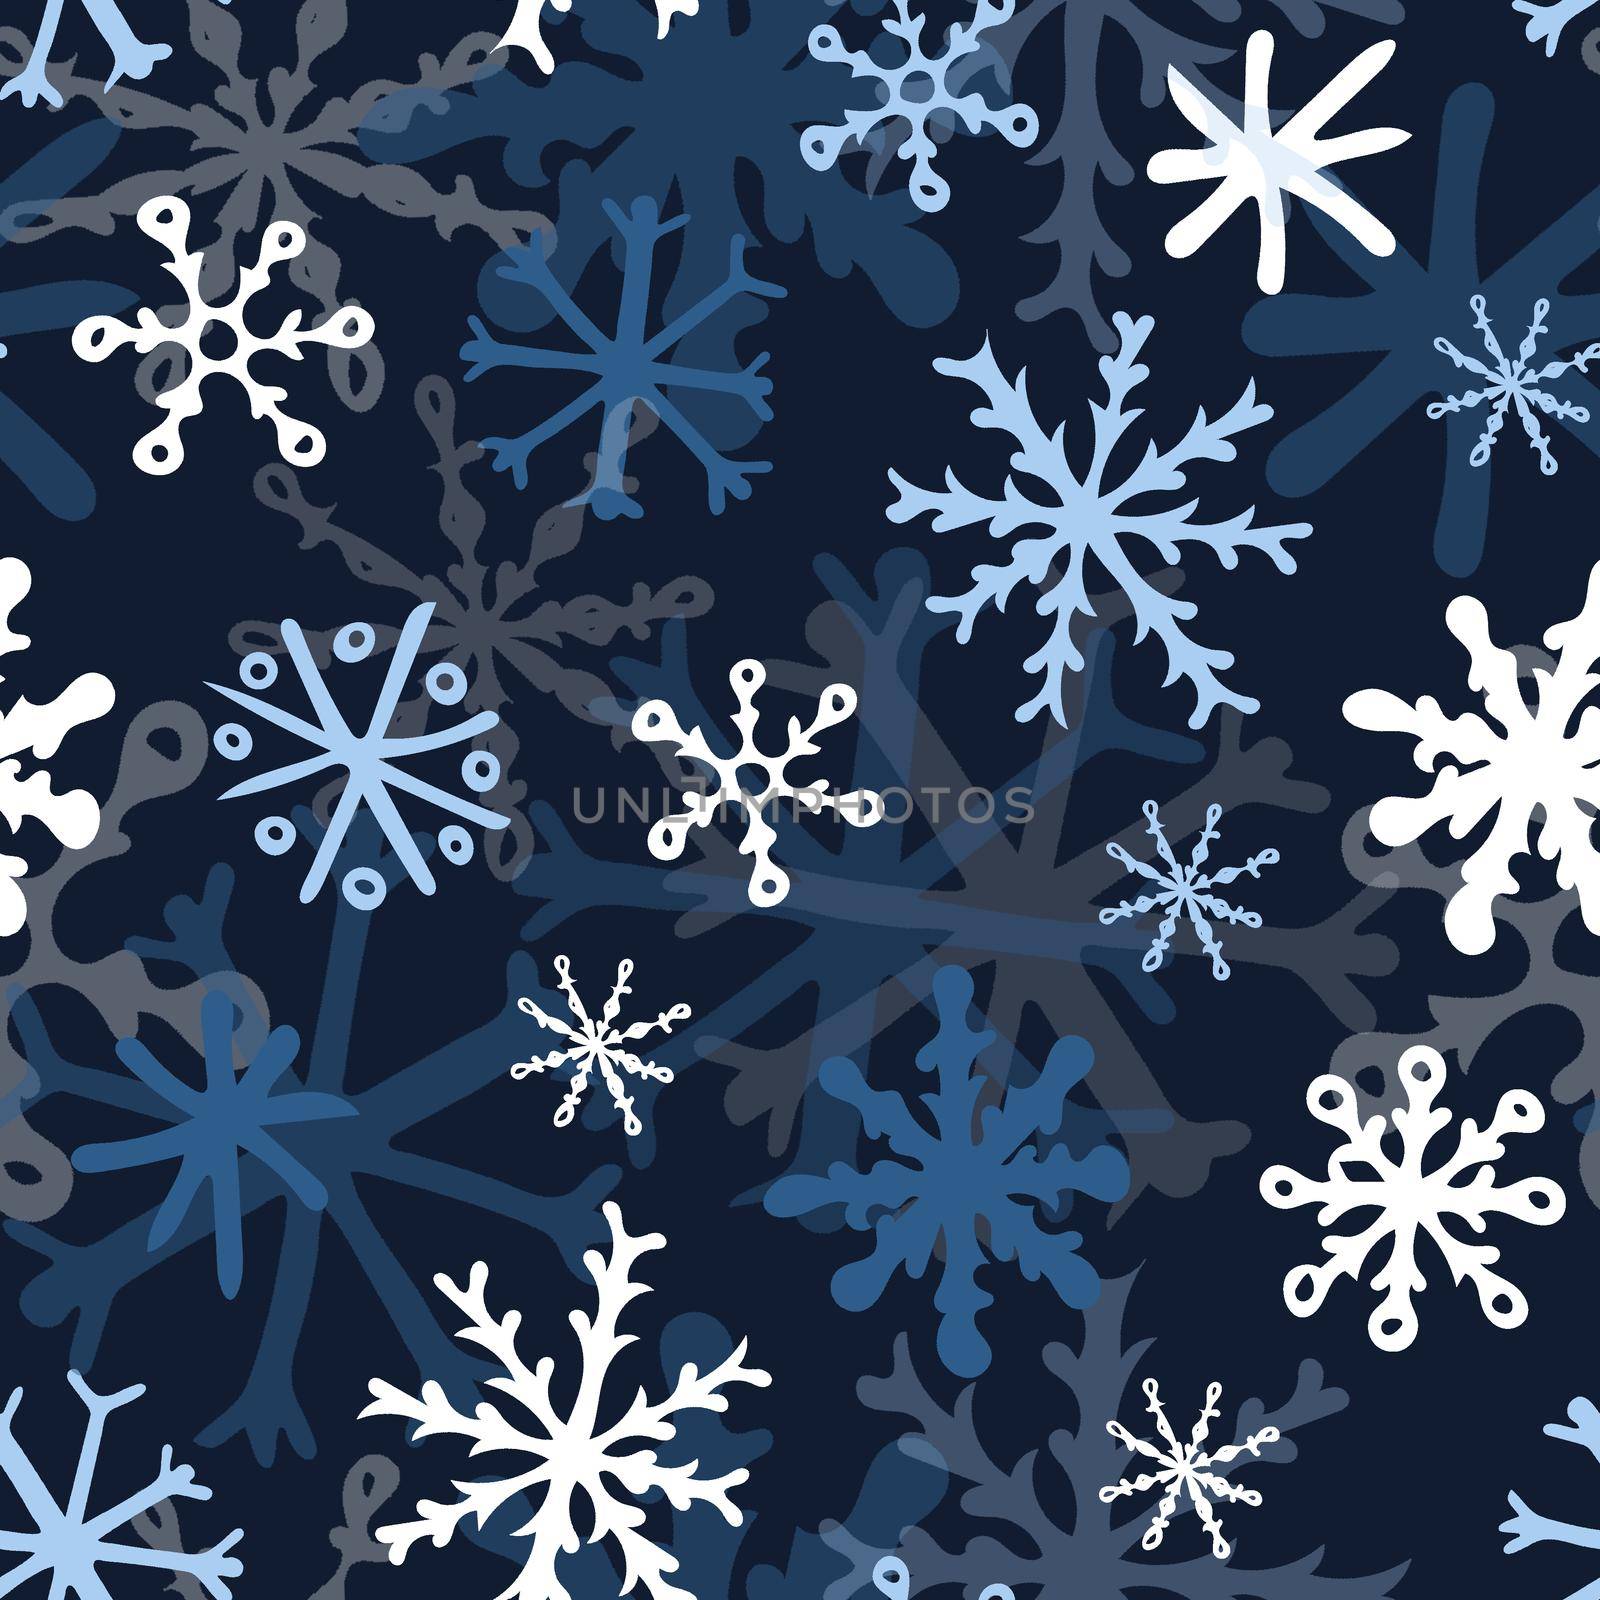 Seamless Pattern with White and Blue Snowflakes on Dark Blue Background. Abstract Hand-Drawn Doodle Snowflakes.